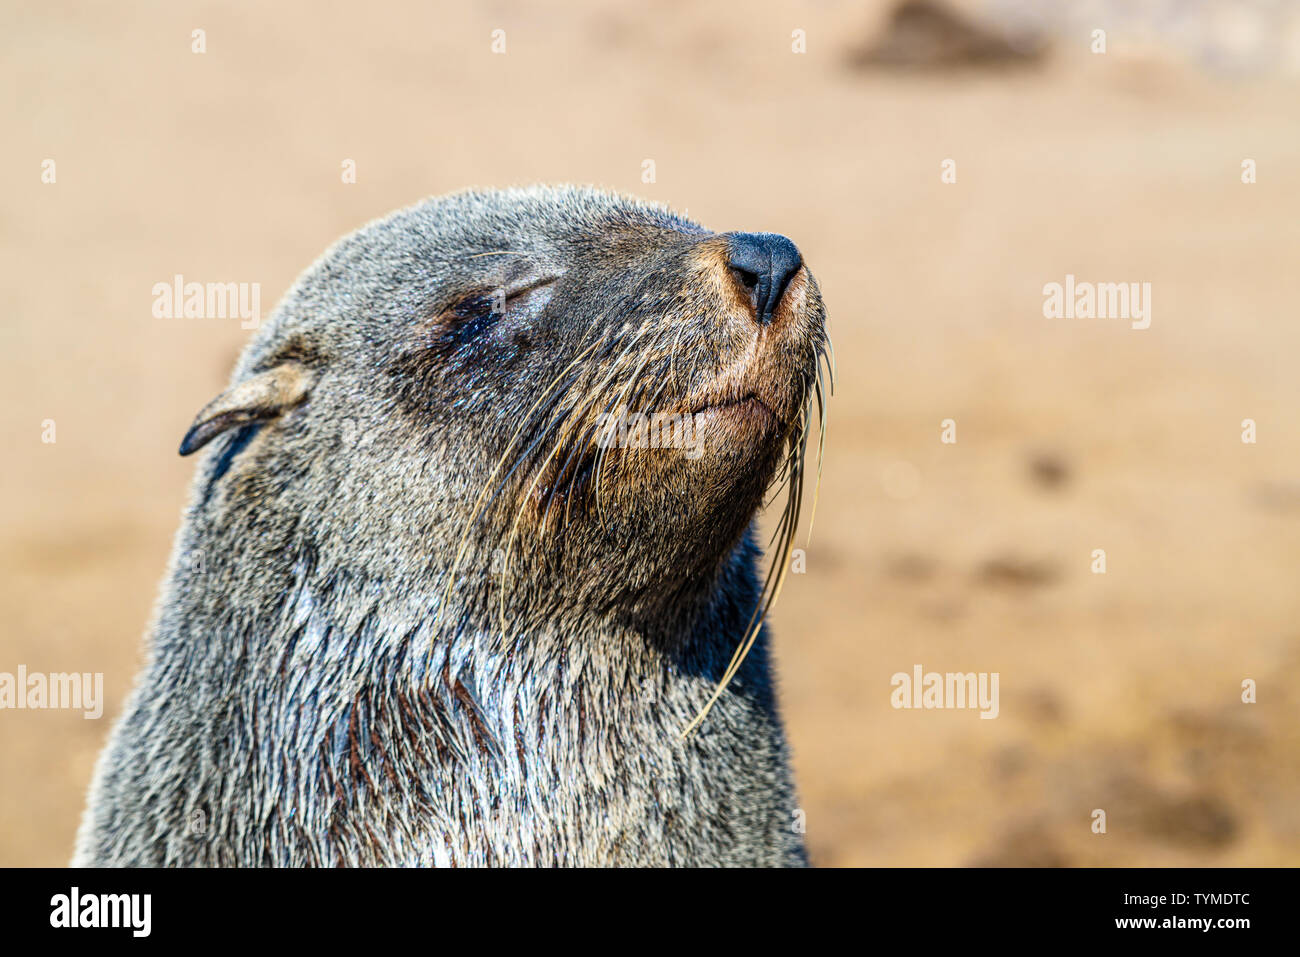 Cute seal at one of the largest colonies of Cape Fur Seals in the world, Cape Cross, Skeleton Coast, Namibia Stock Photo